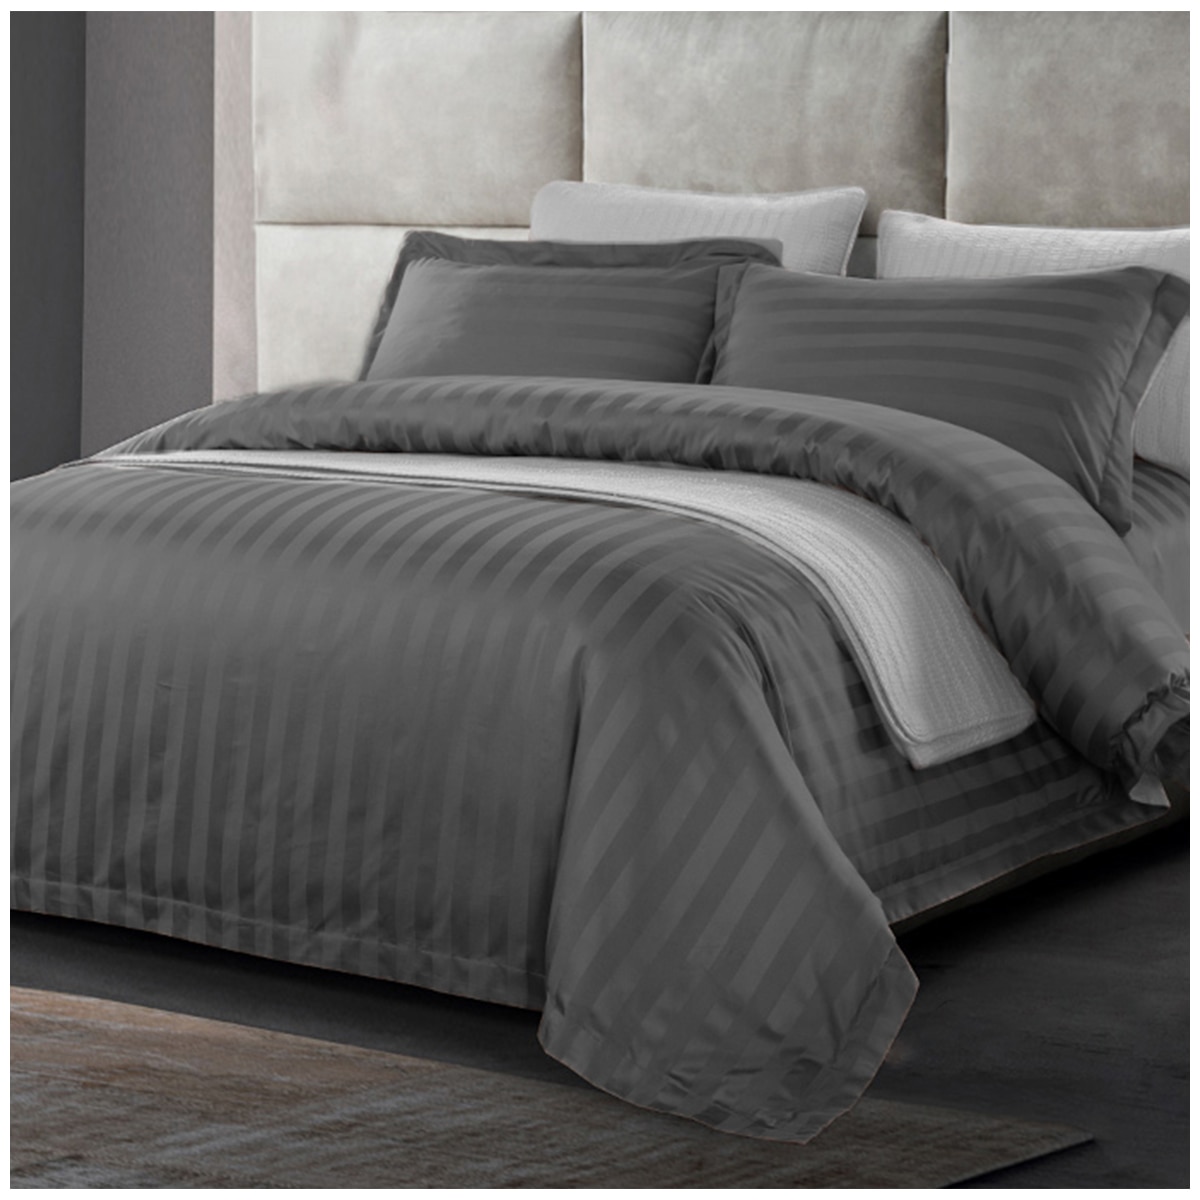 Hotel Collection Hotel Collection 600 TC 100% Cotton Sateen 4 Piece Queen sheet Gray 